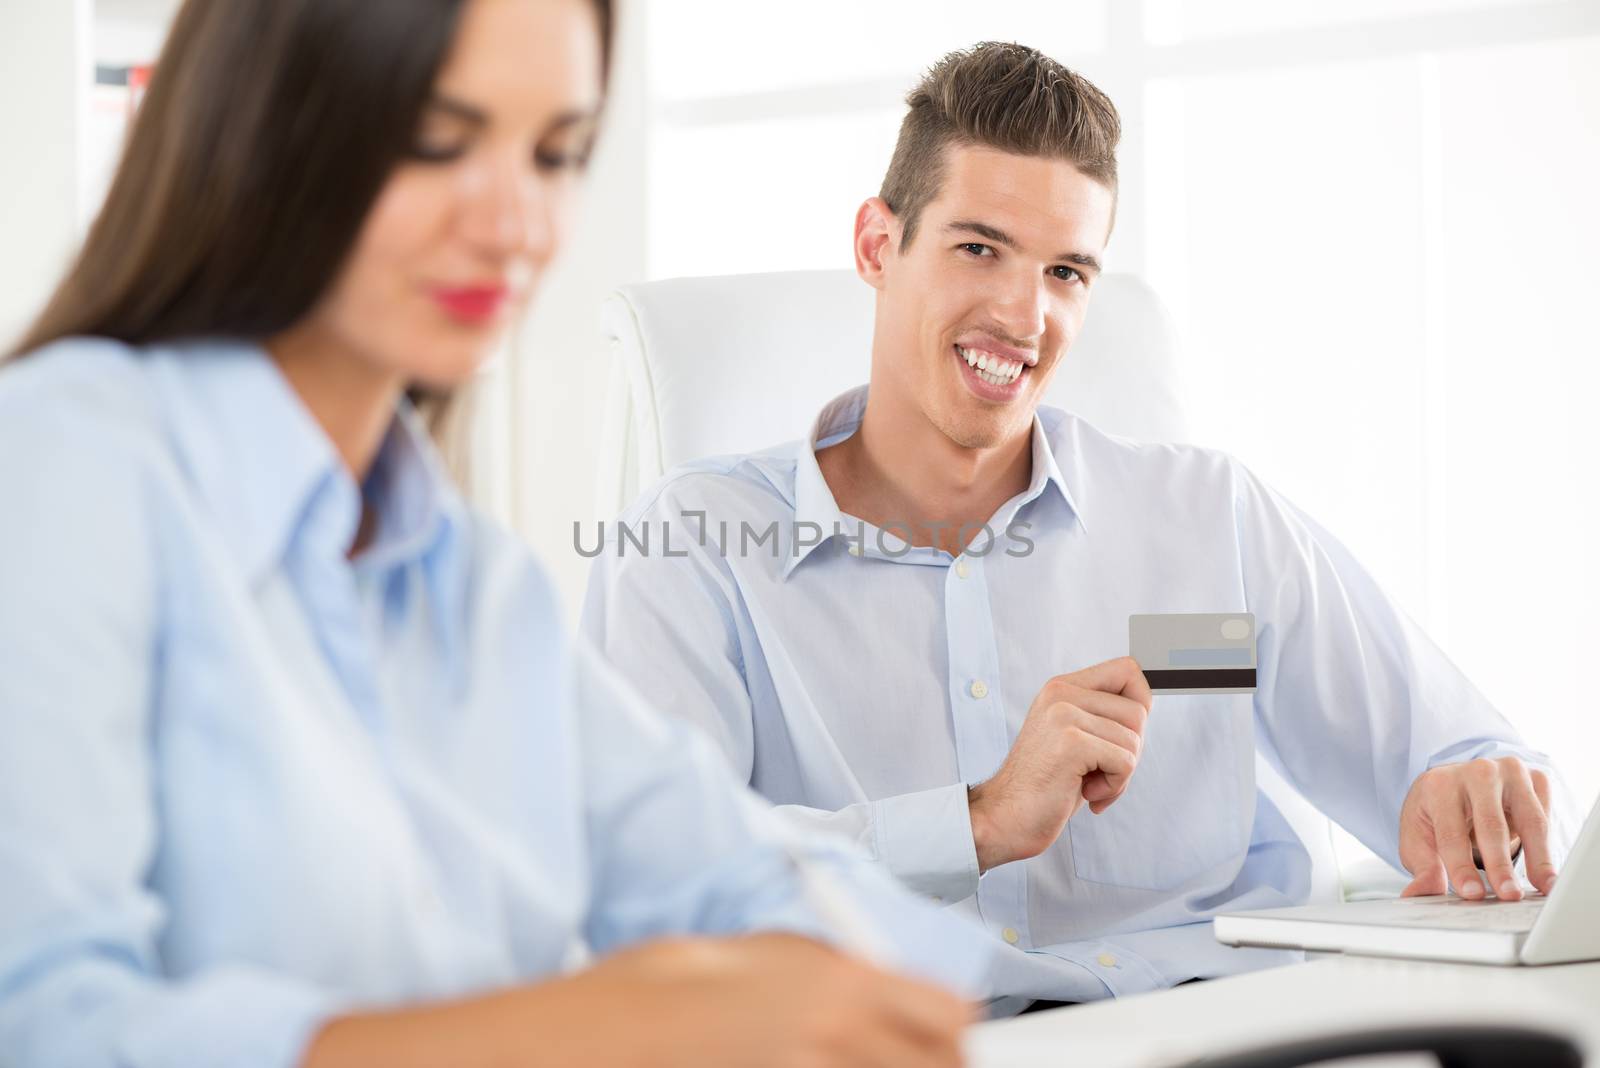 Young business people, man and woman, sitting in an office, a young businessman who is in the foreground holding a credit card and with a smile looking at the camera.